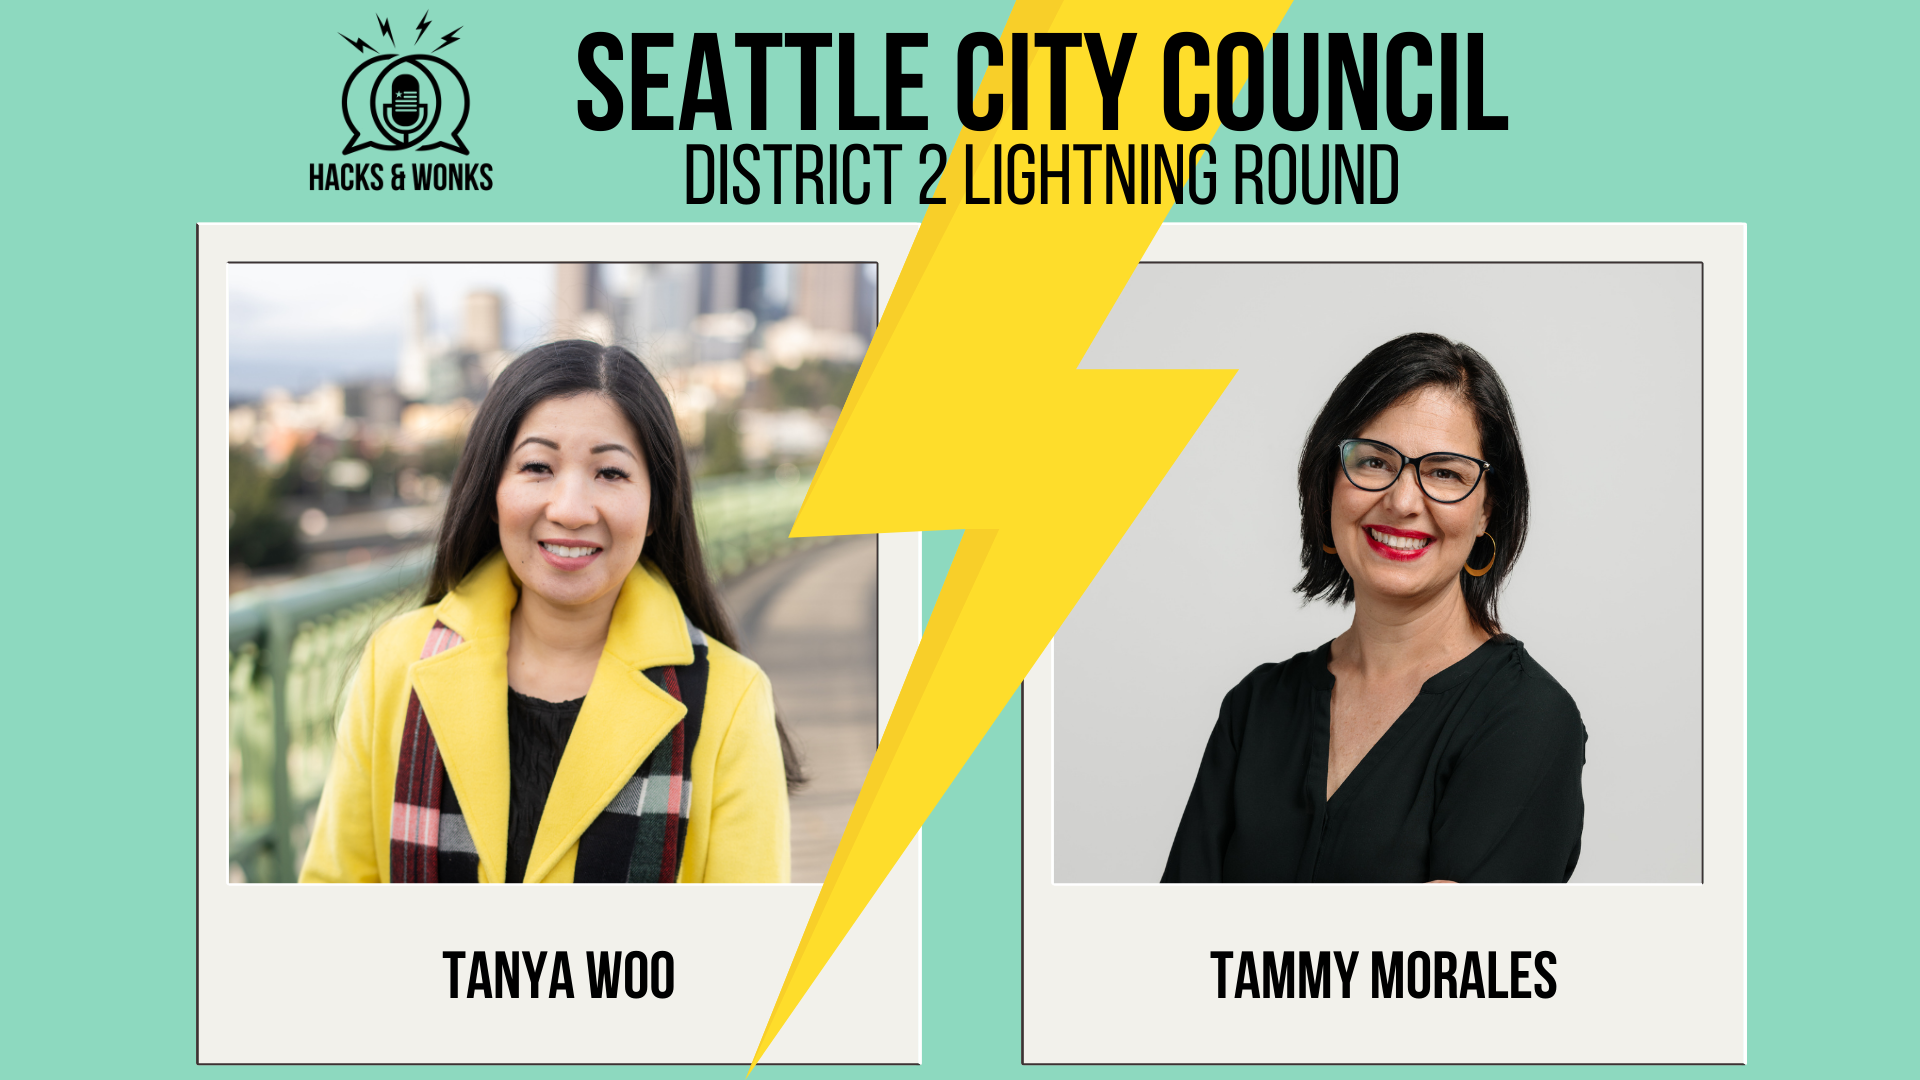 Hacks & Wonks Seattle City Council District 2 Lightning Round  Lightning bolt divides photos of the District 2 candidates: Tanya Woo and Tammy Morales